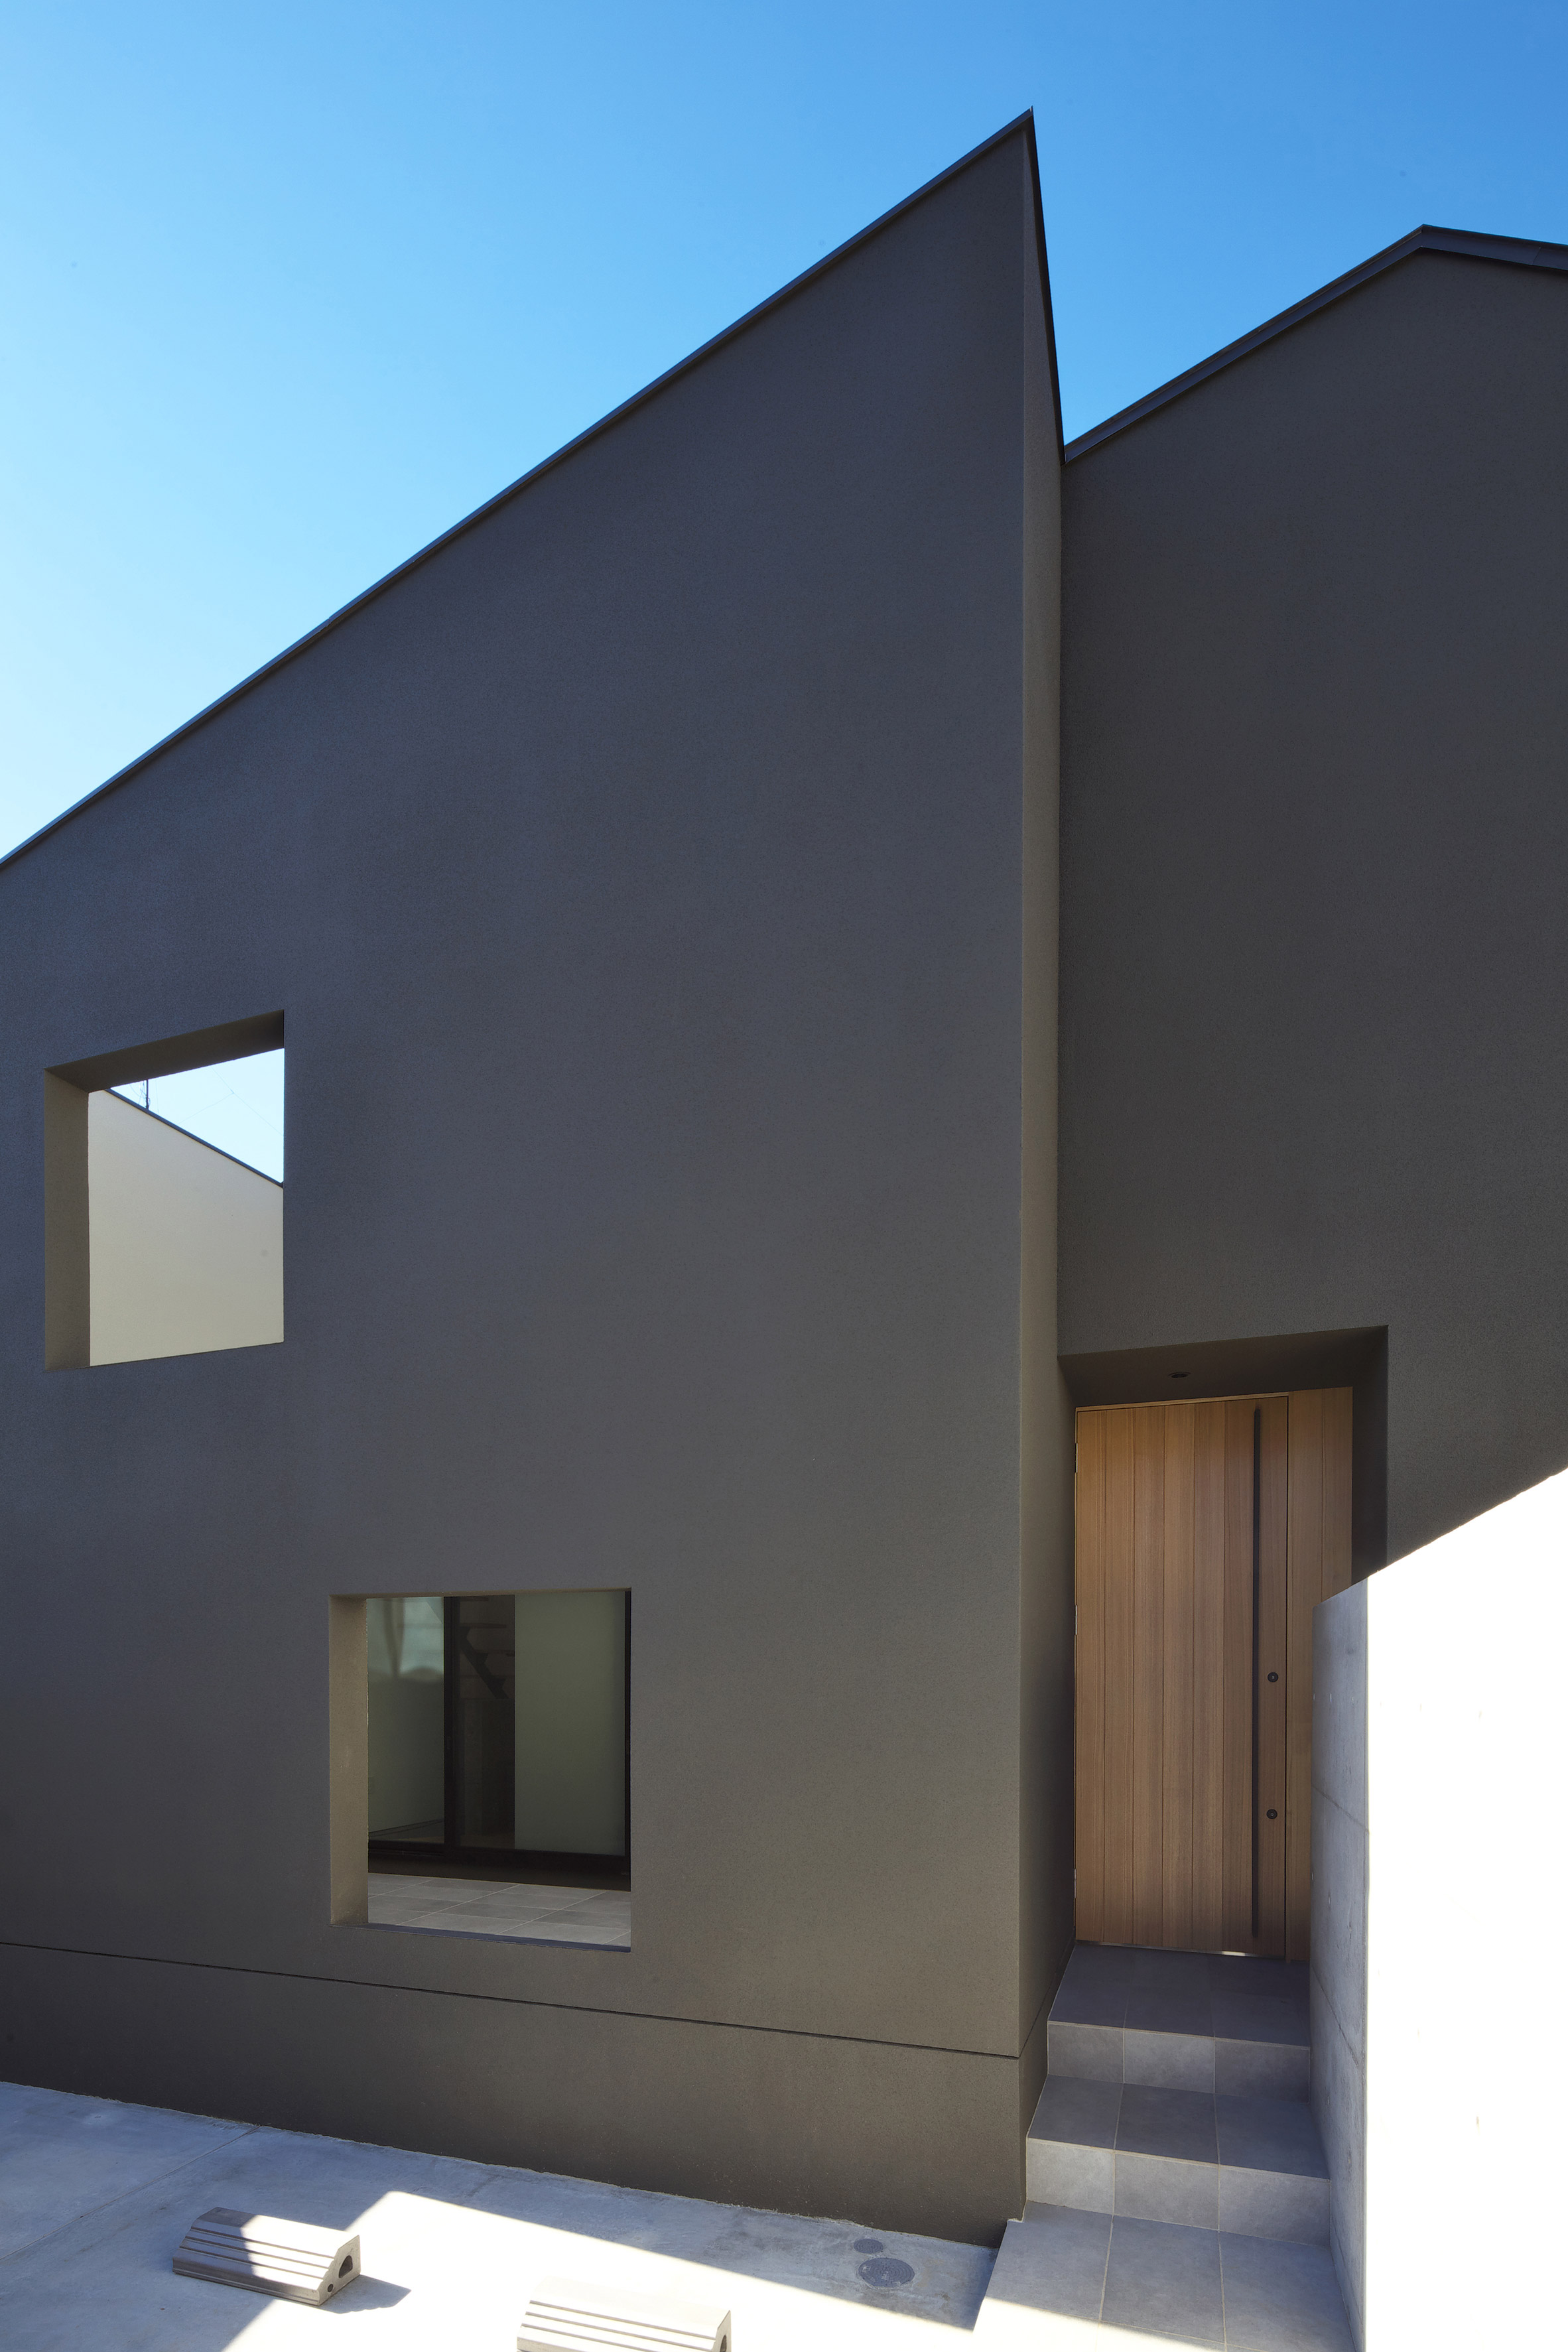 house-of-fluctuations-satoru-hirota-architects-architecture-tokyo-japan-residential_dezeen_2364_col_23